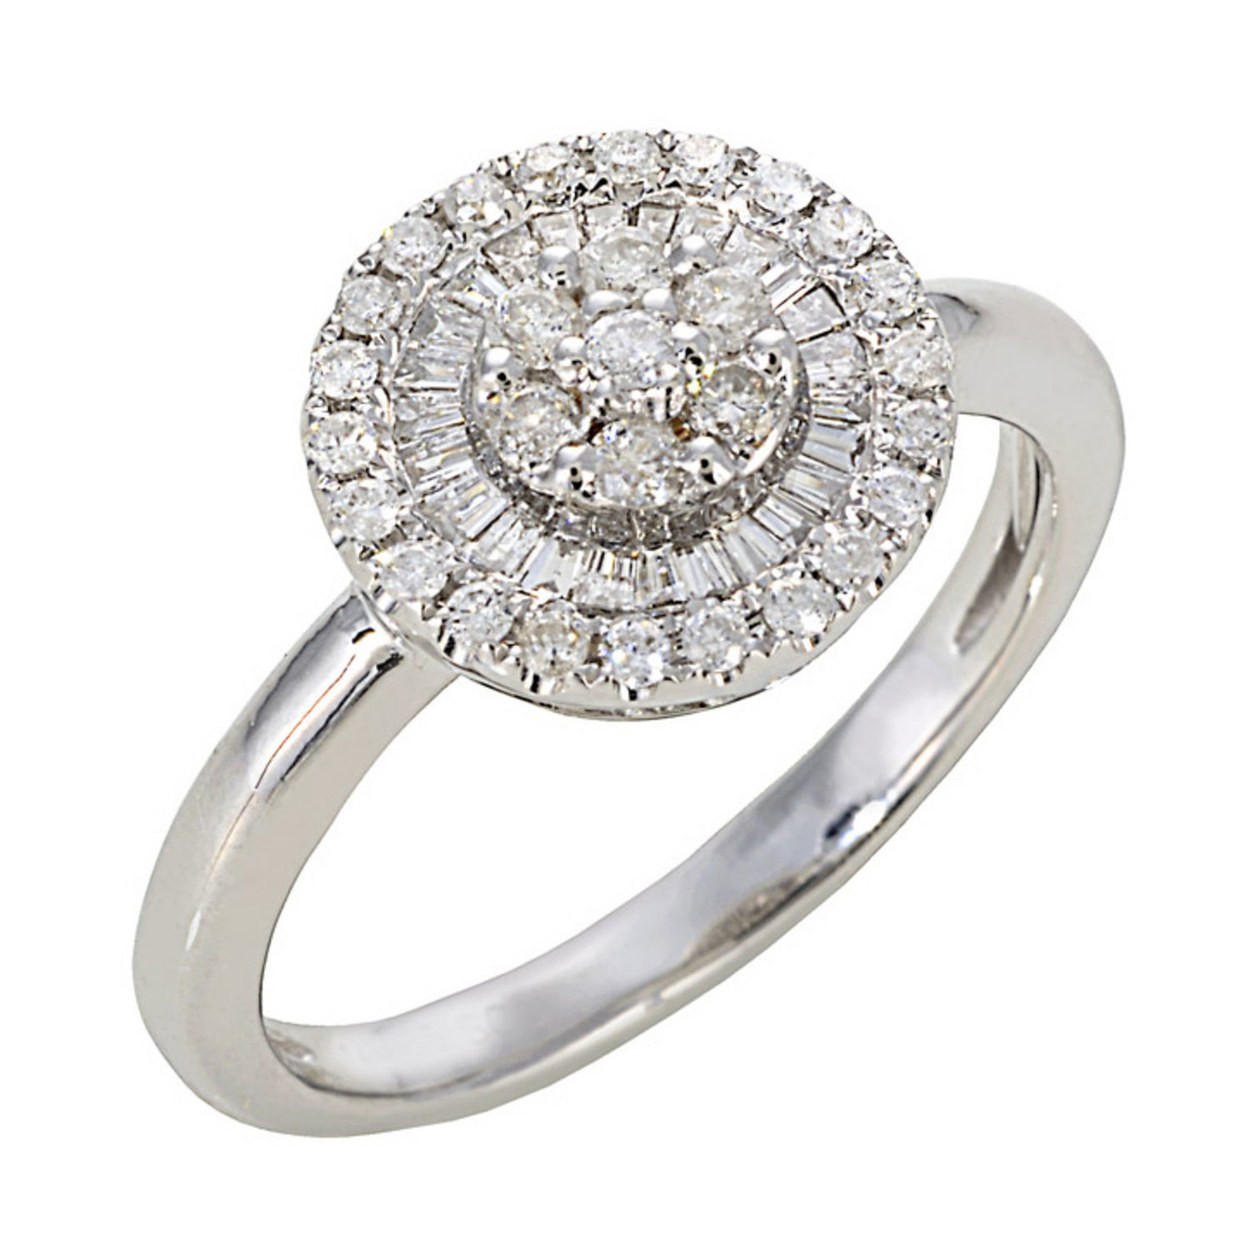 Wedding Rings Under 1000
 Affordable Engagement Rings Under $1 000